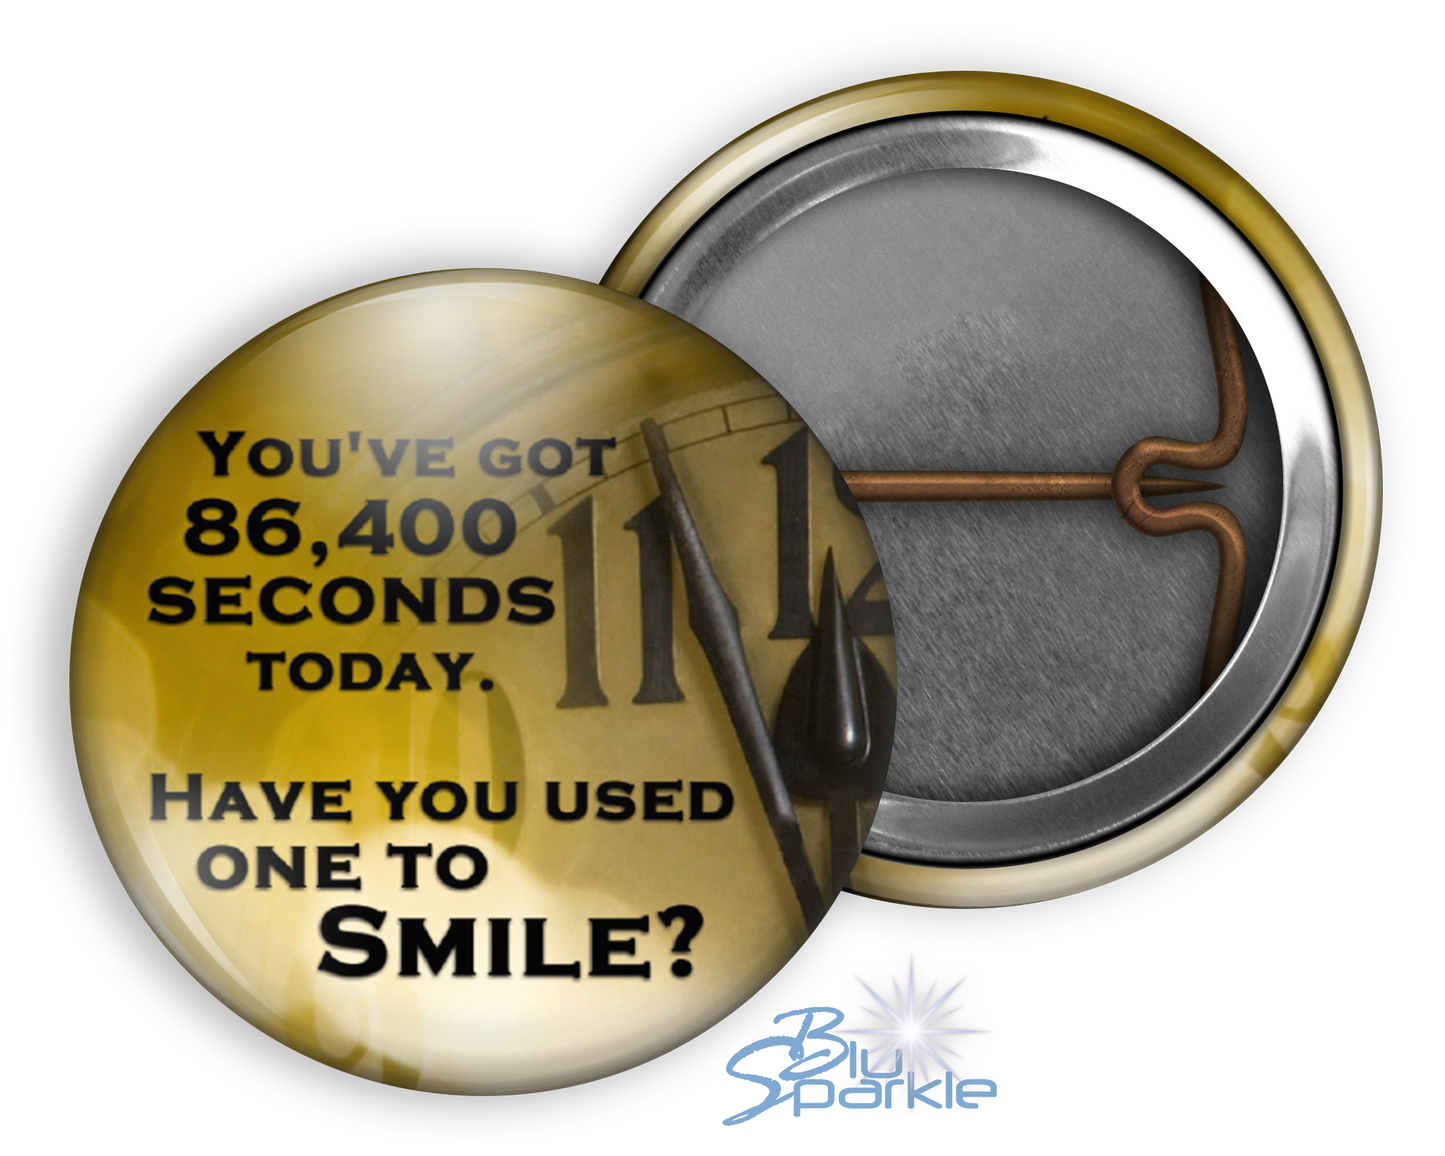 You've got 86,400 seconds today. Have you used one to smile? - Pinback Buttons